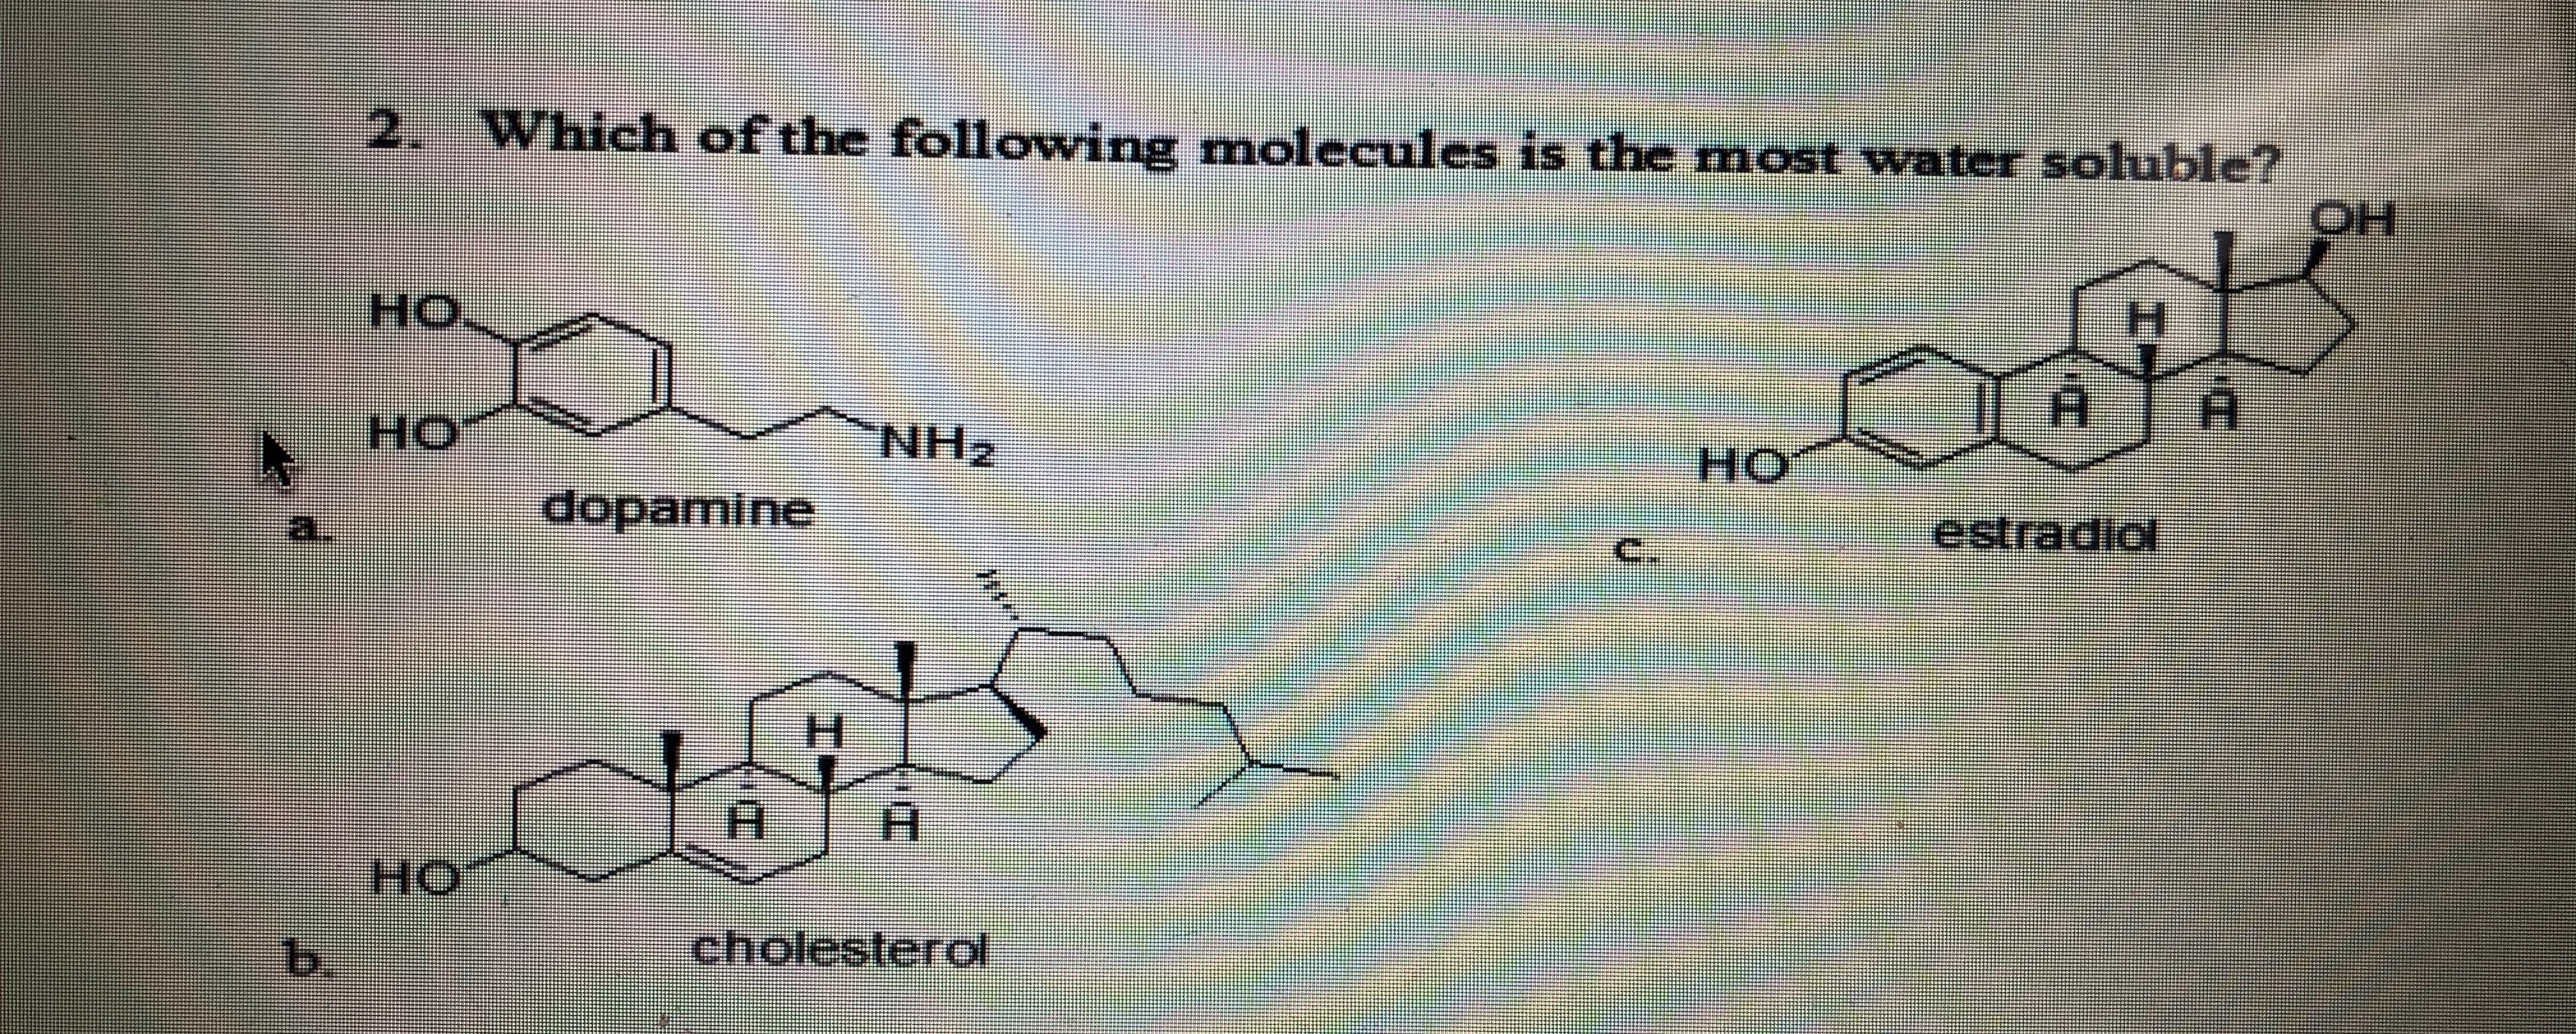 2. Which of the following molecules is the most vwater soluble?
HO
HO
H.
HO
dopamine
estradiol
H.
HO
b.
cholesterol
